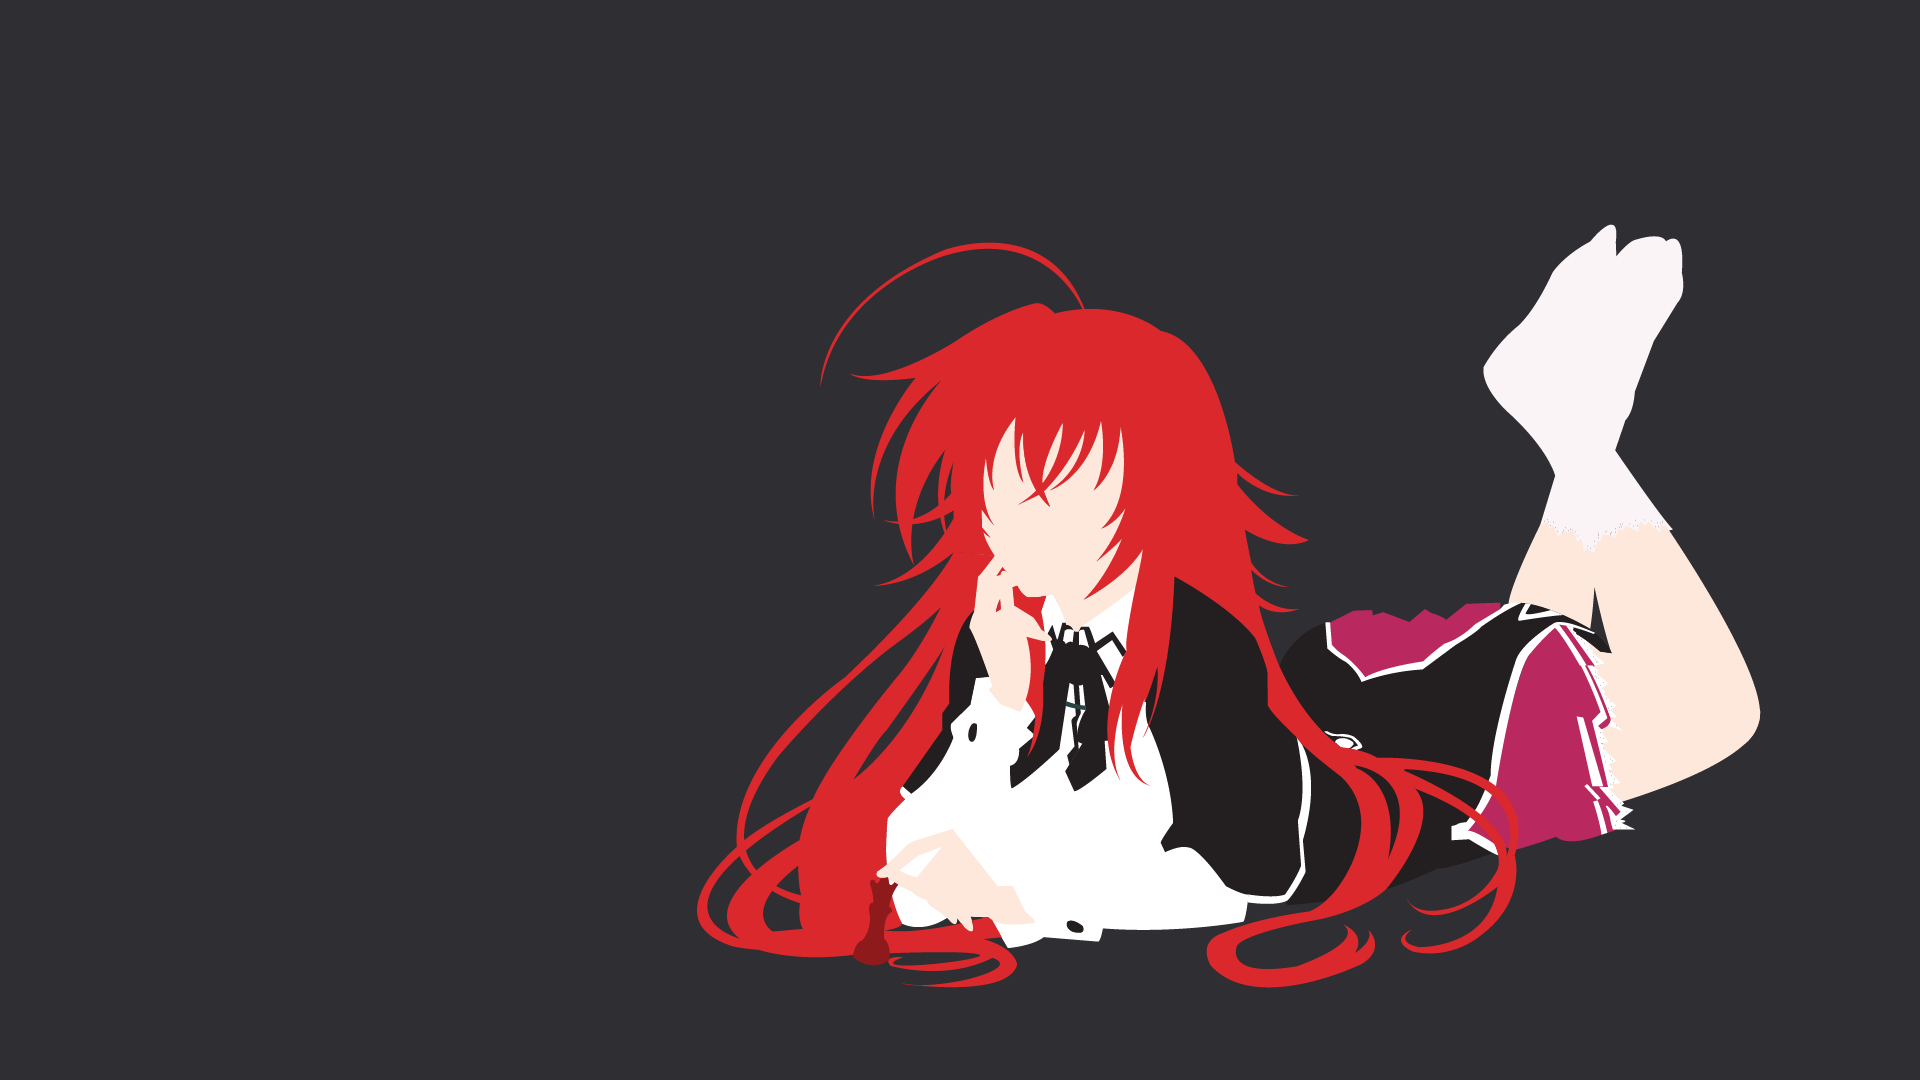 Anime 1920x1080 Gremory Rias fan art anime High School DxD anime vectors minimalism lying on front dark background simple background redhead women legs up barefoot anime girls